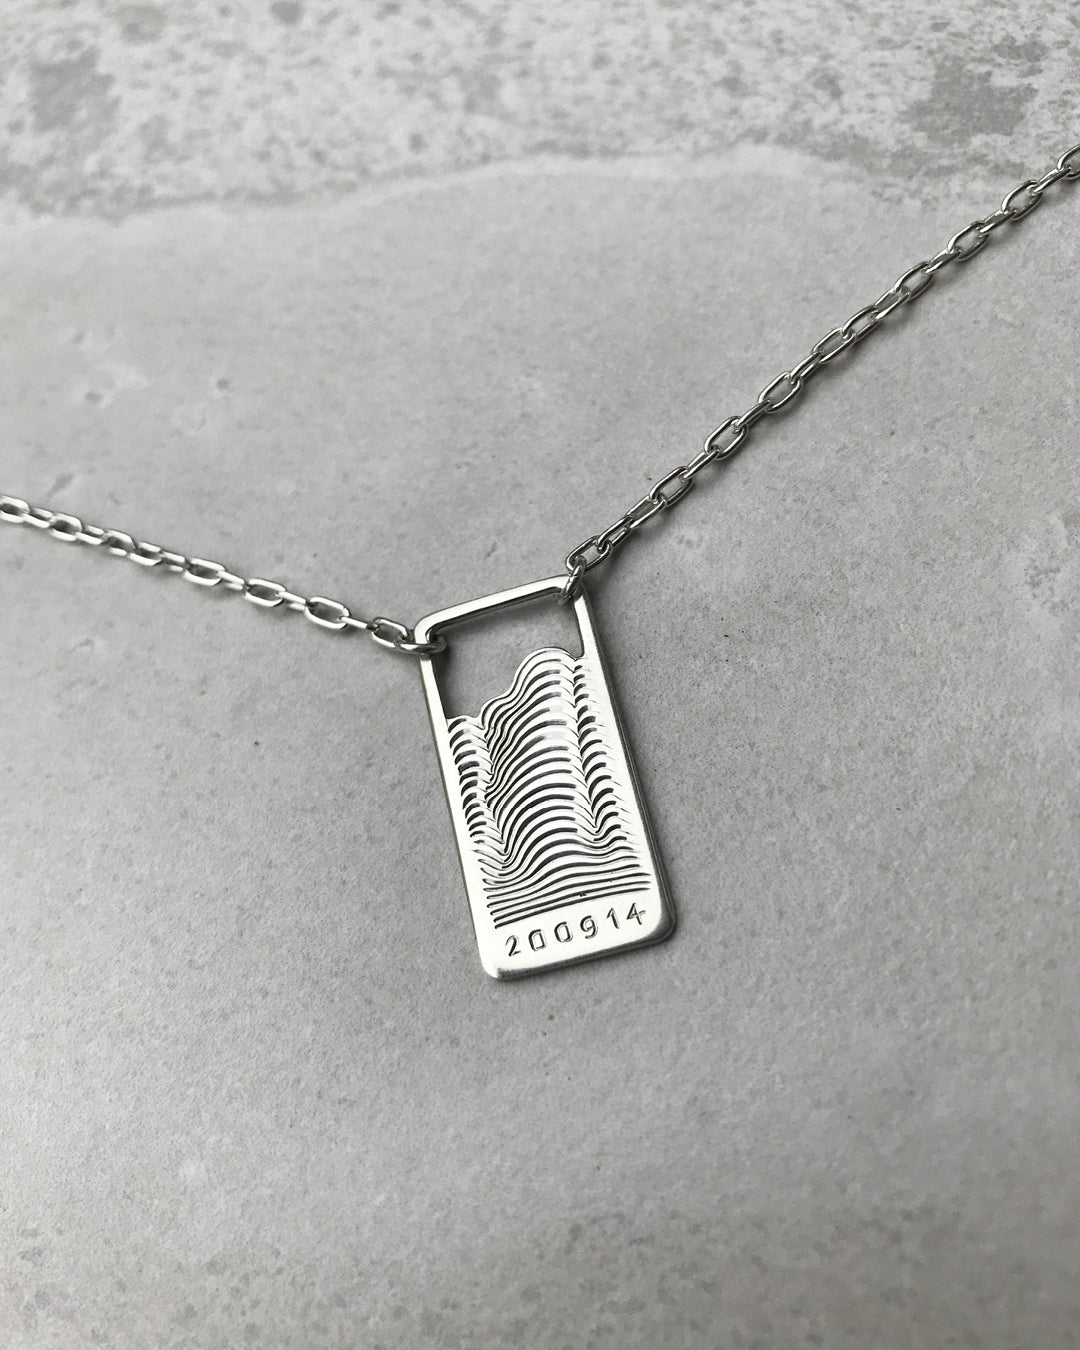 200914 - Hand Engraved Sterling Silver .925 Pendant